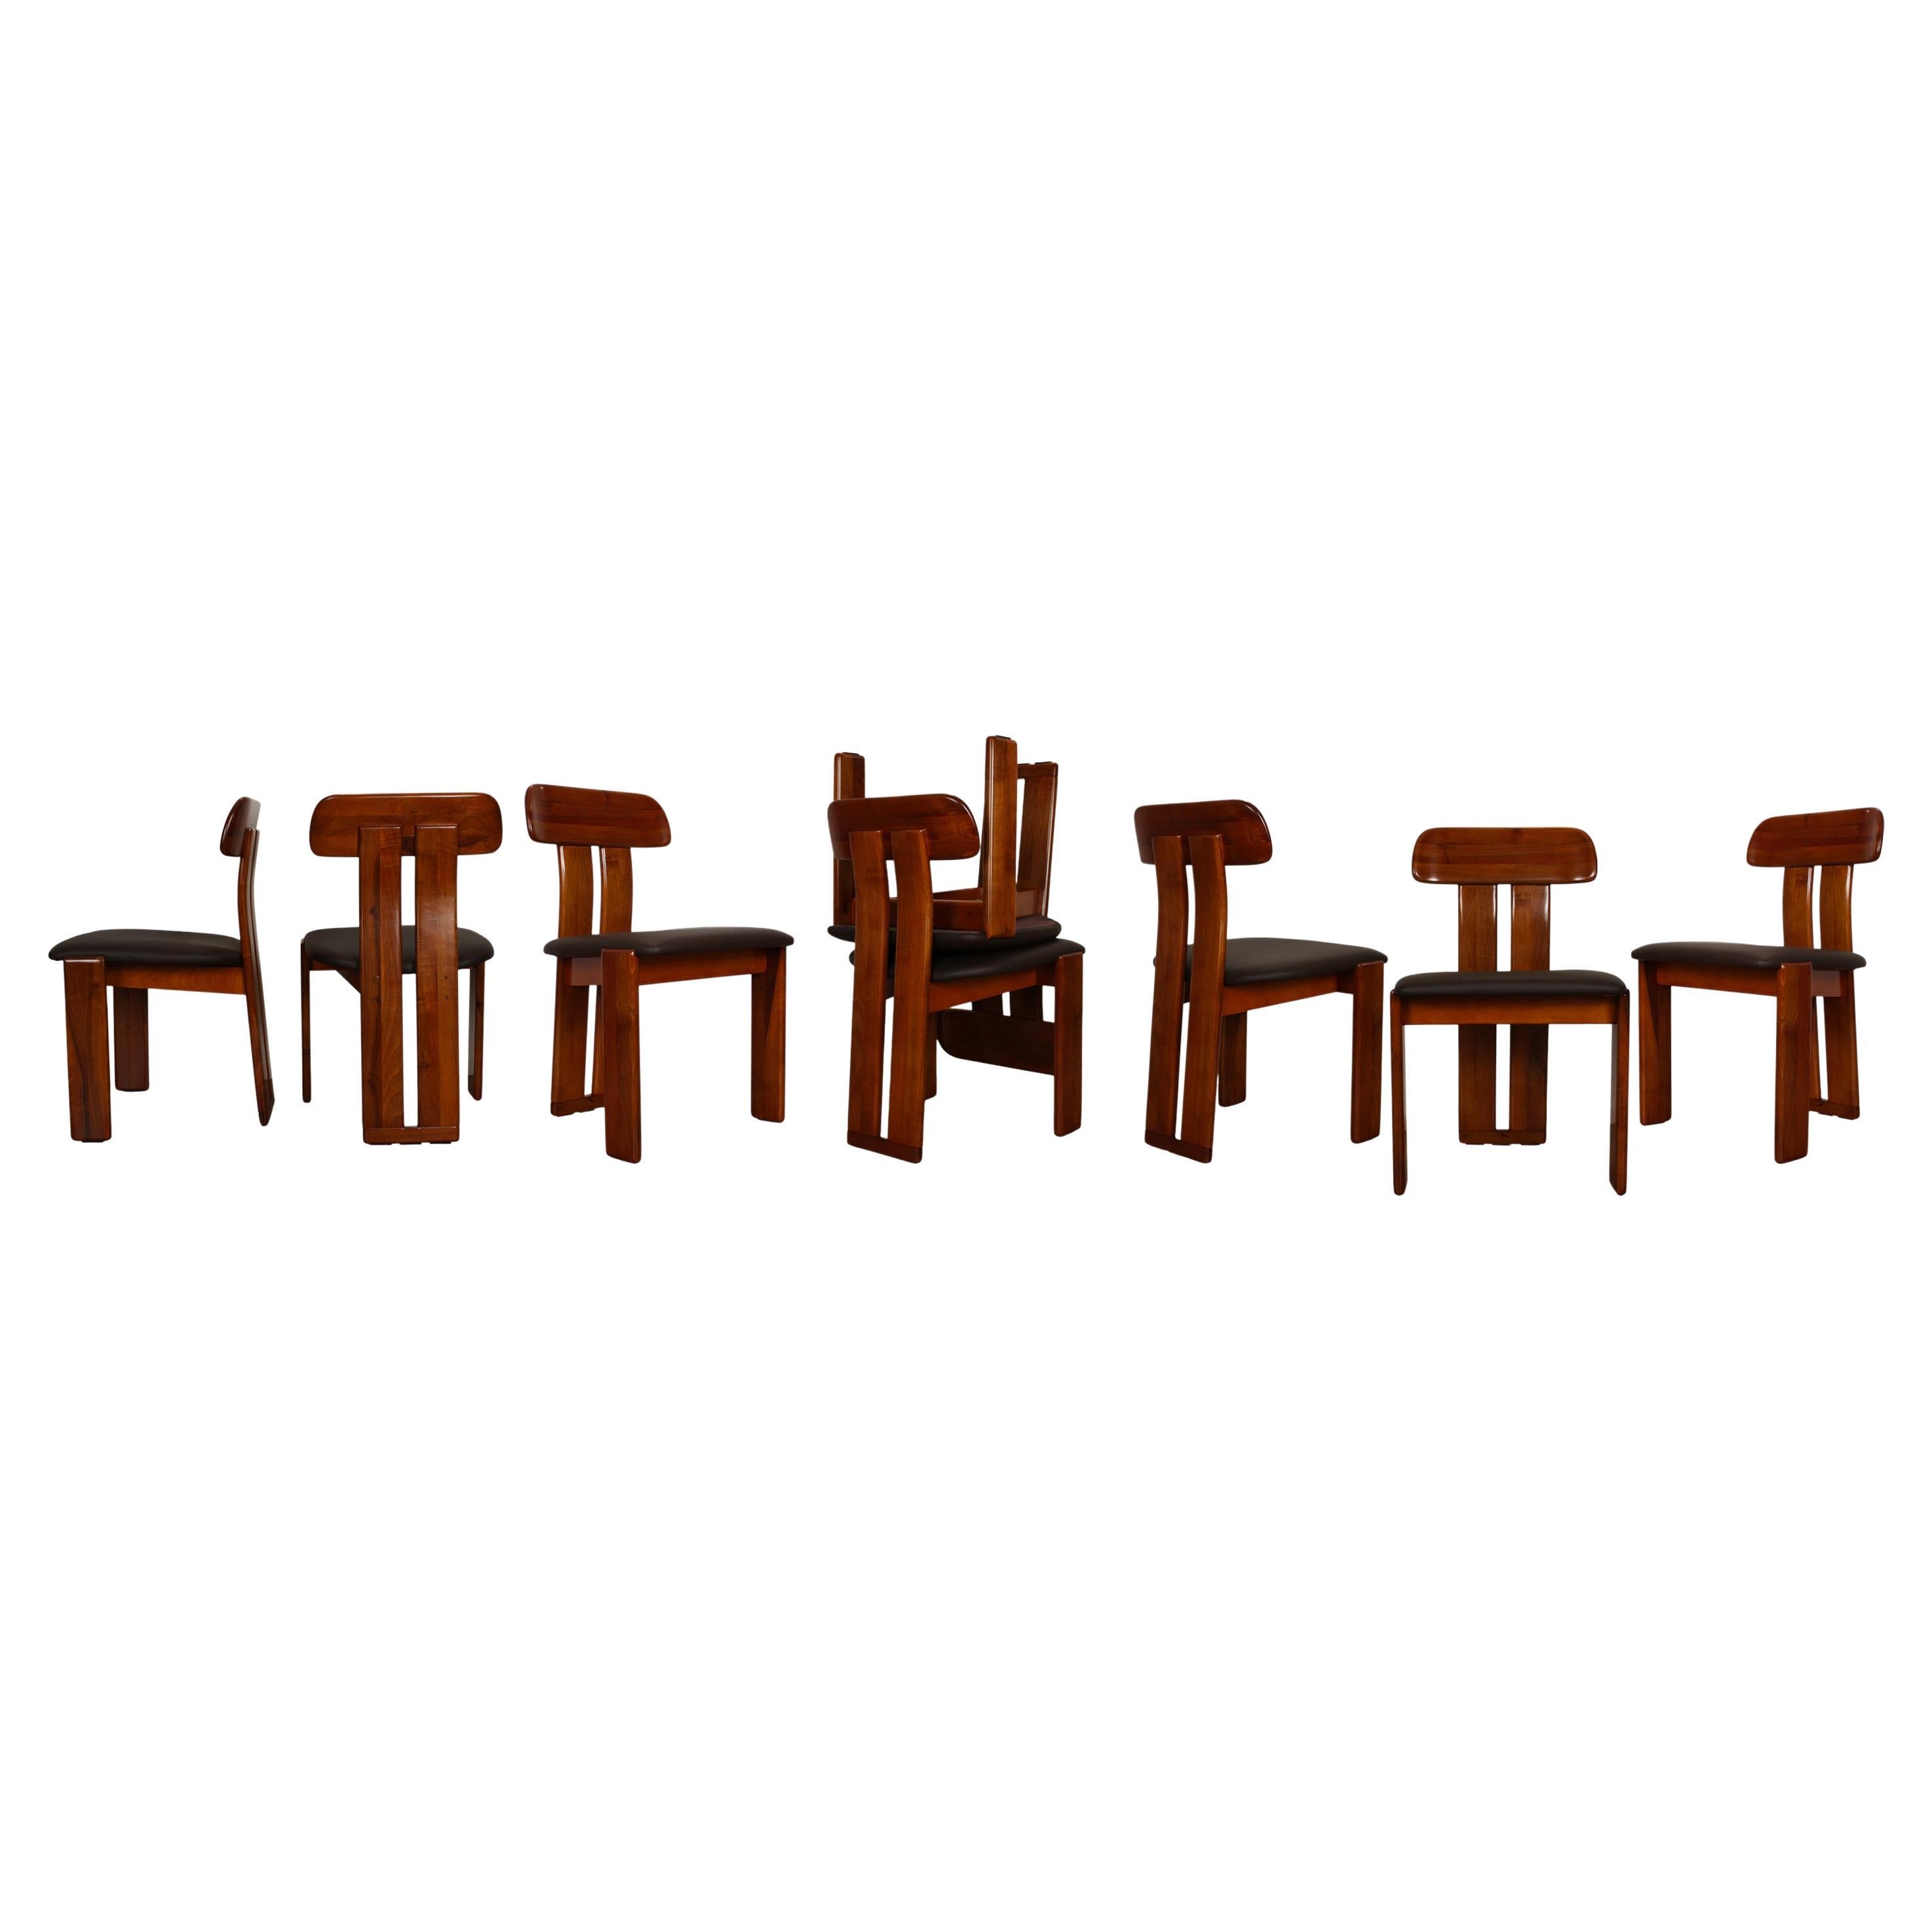 Mario Marenco Walnut Sapporo Dining Chairs for Mobilgirgi, 1970s, Set of 8 For Sale